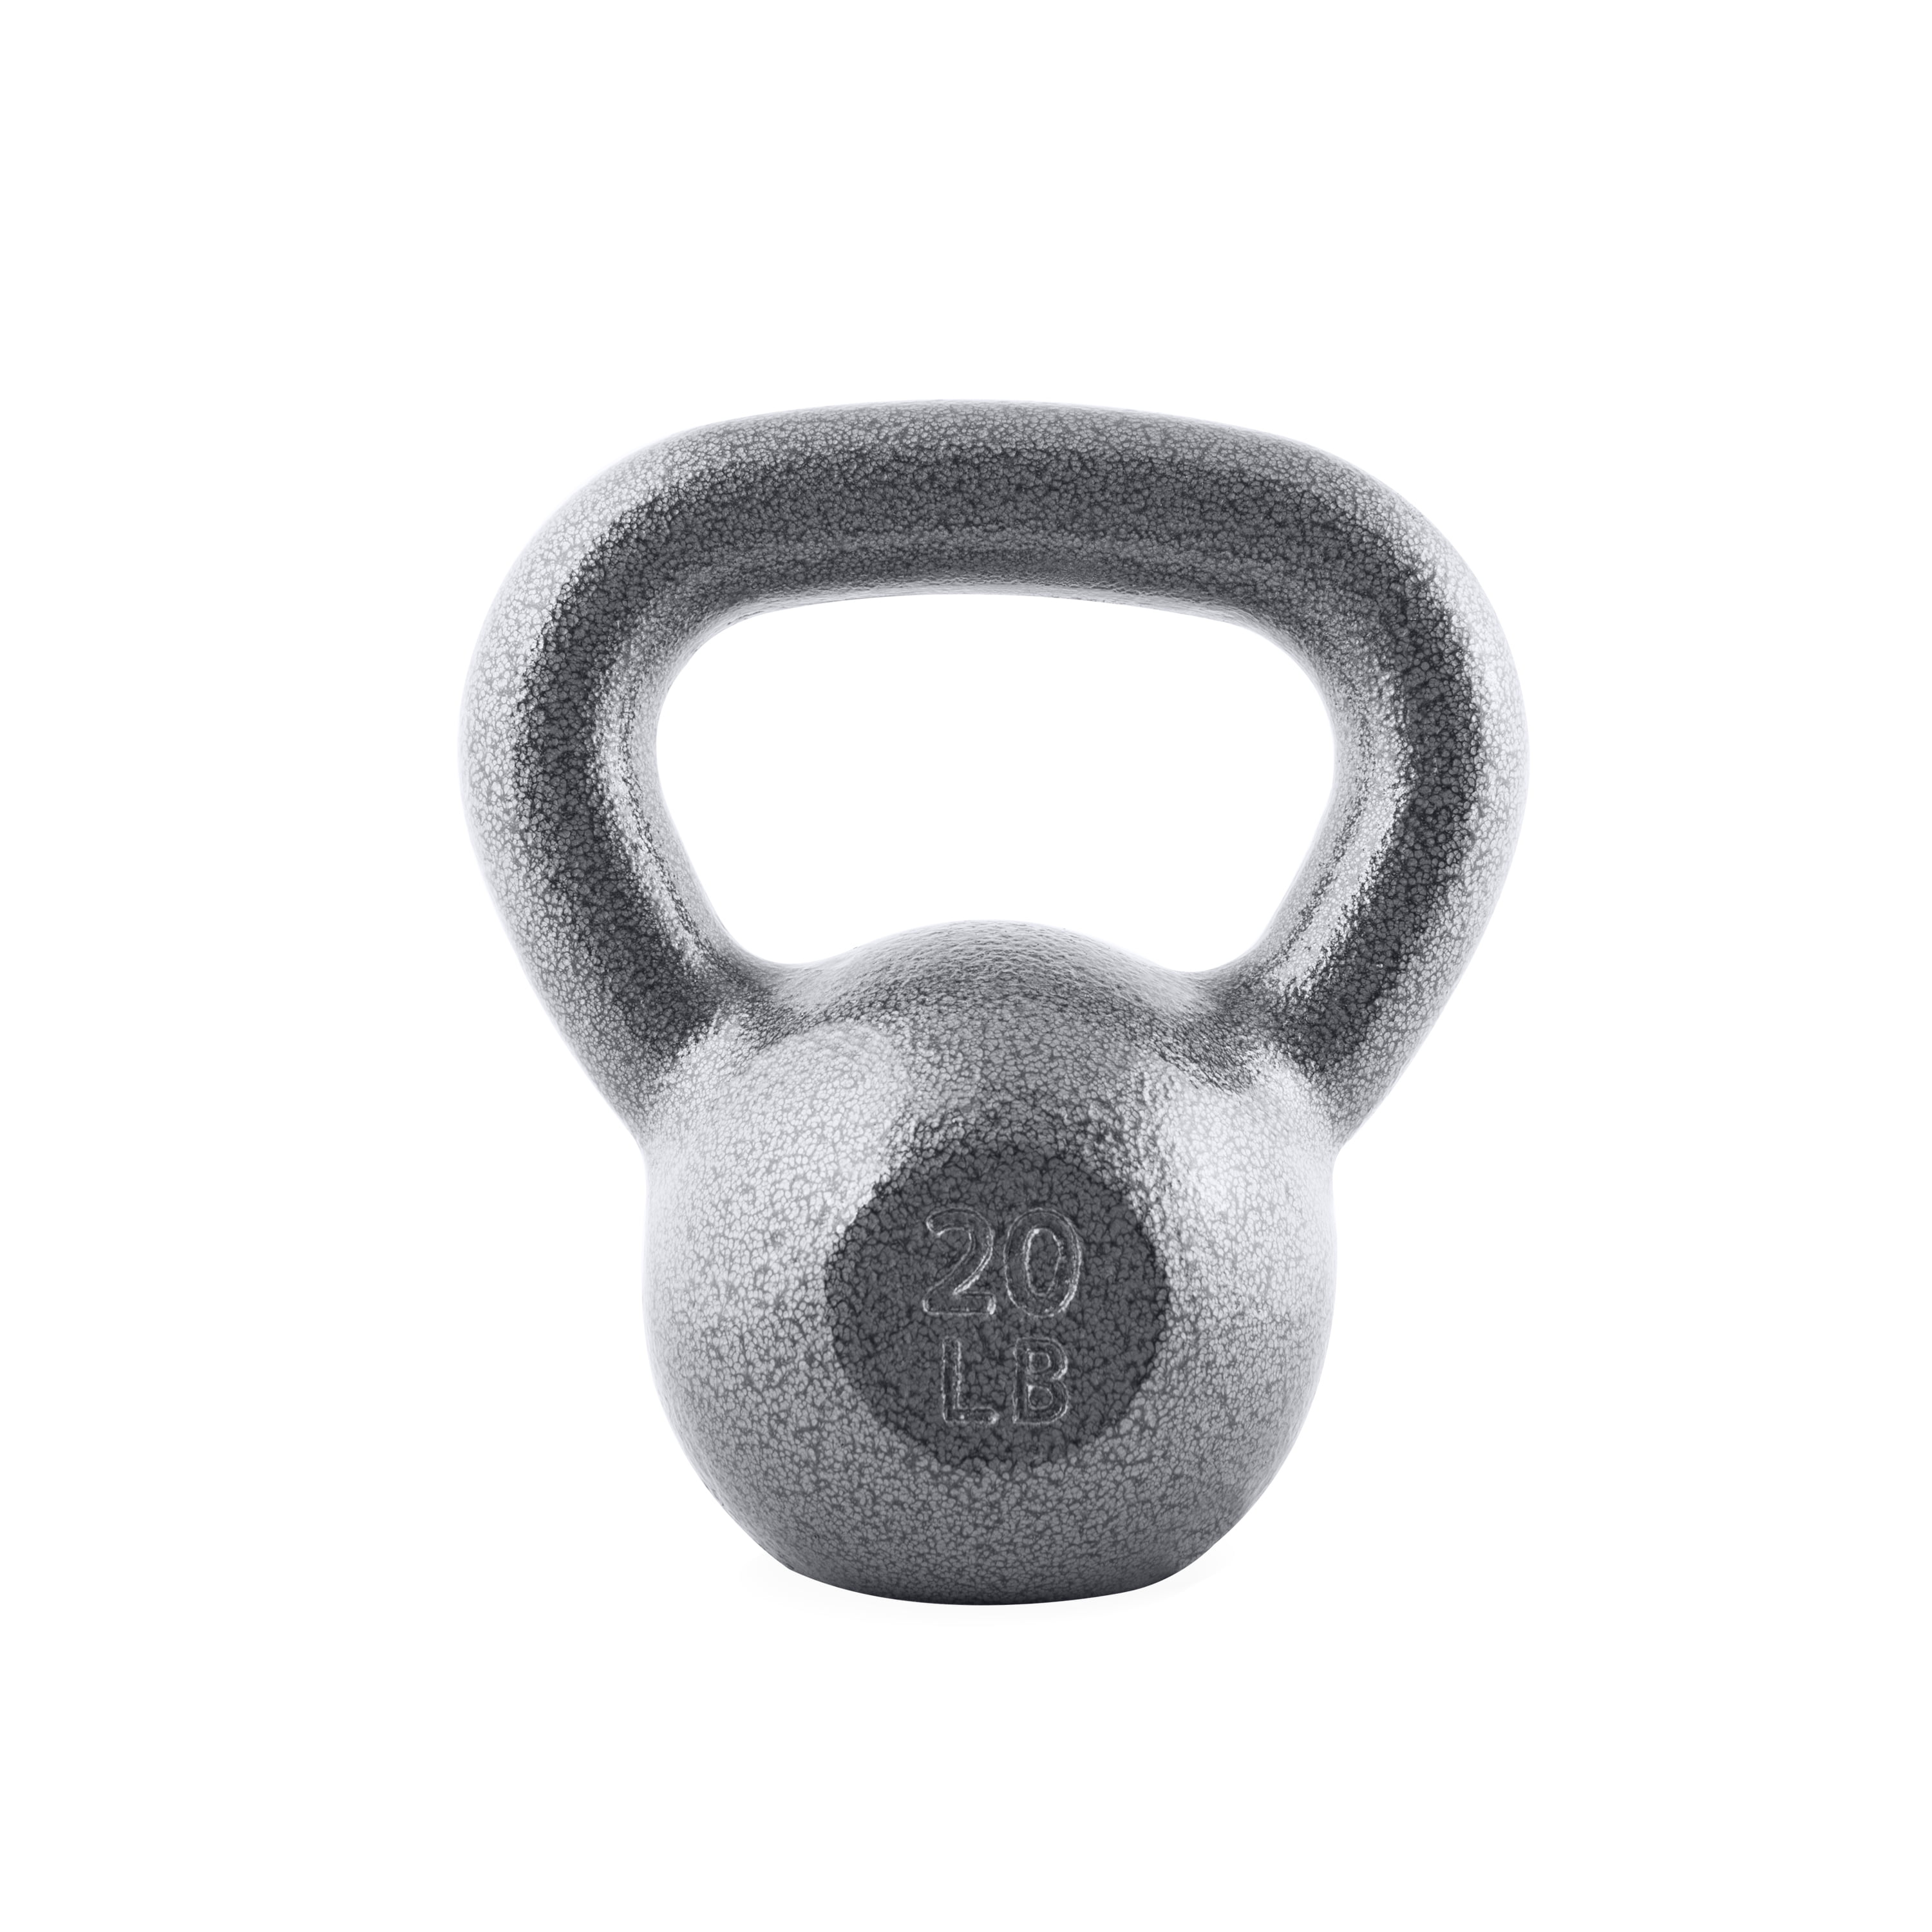 Free Shipping 15 LB New PRCTZ Solid Cast Iron Kettlebell 